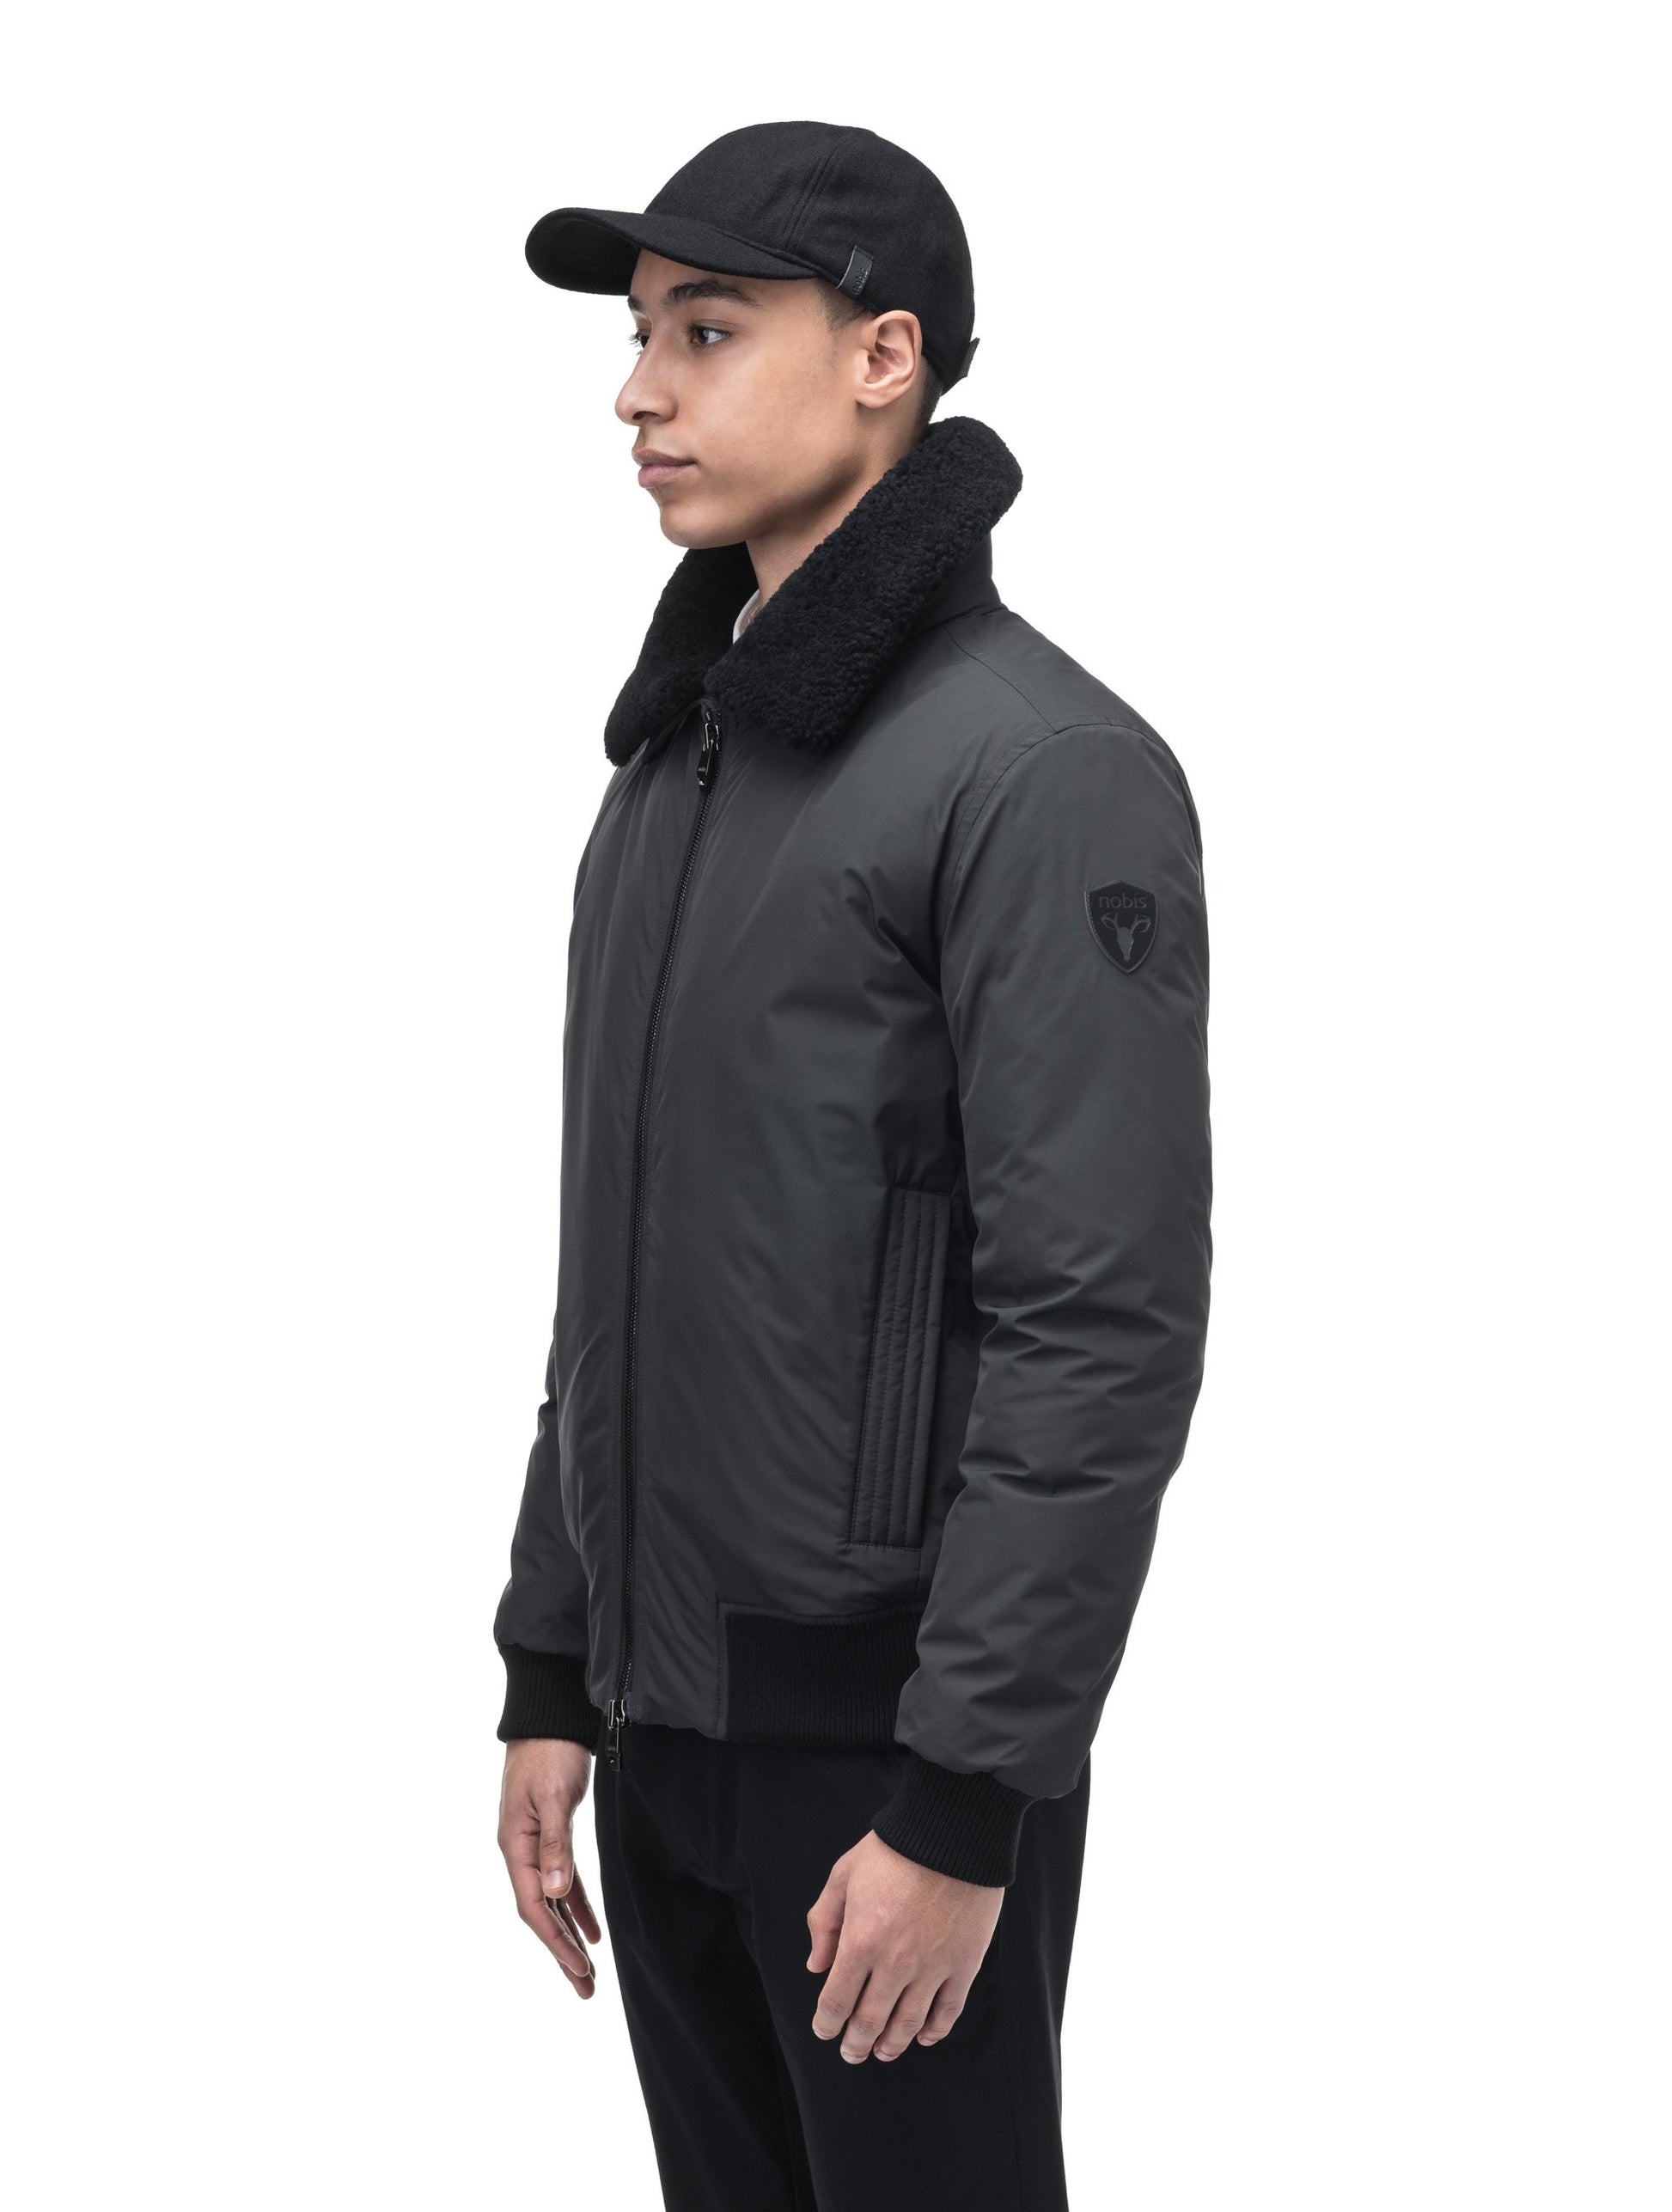 Sonar Men's Aviator Jacket in hip length, Canadian duck down insulation, removable shearling collar with hidden tuckable hood, and two-way front zipper, in Black